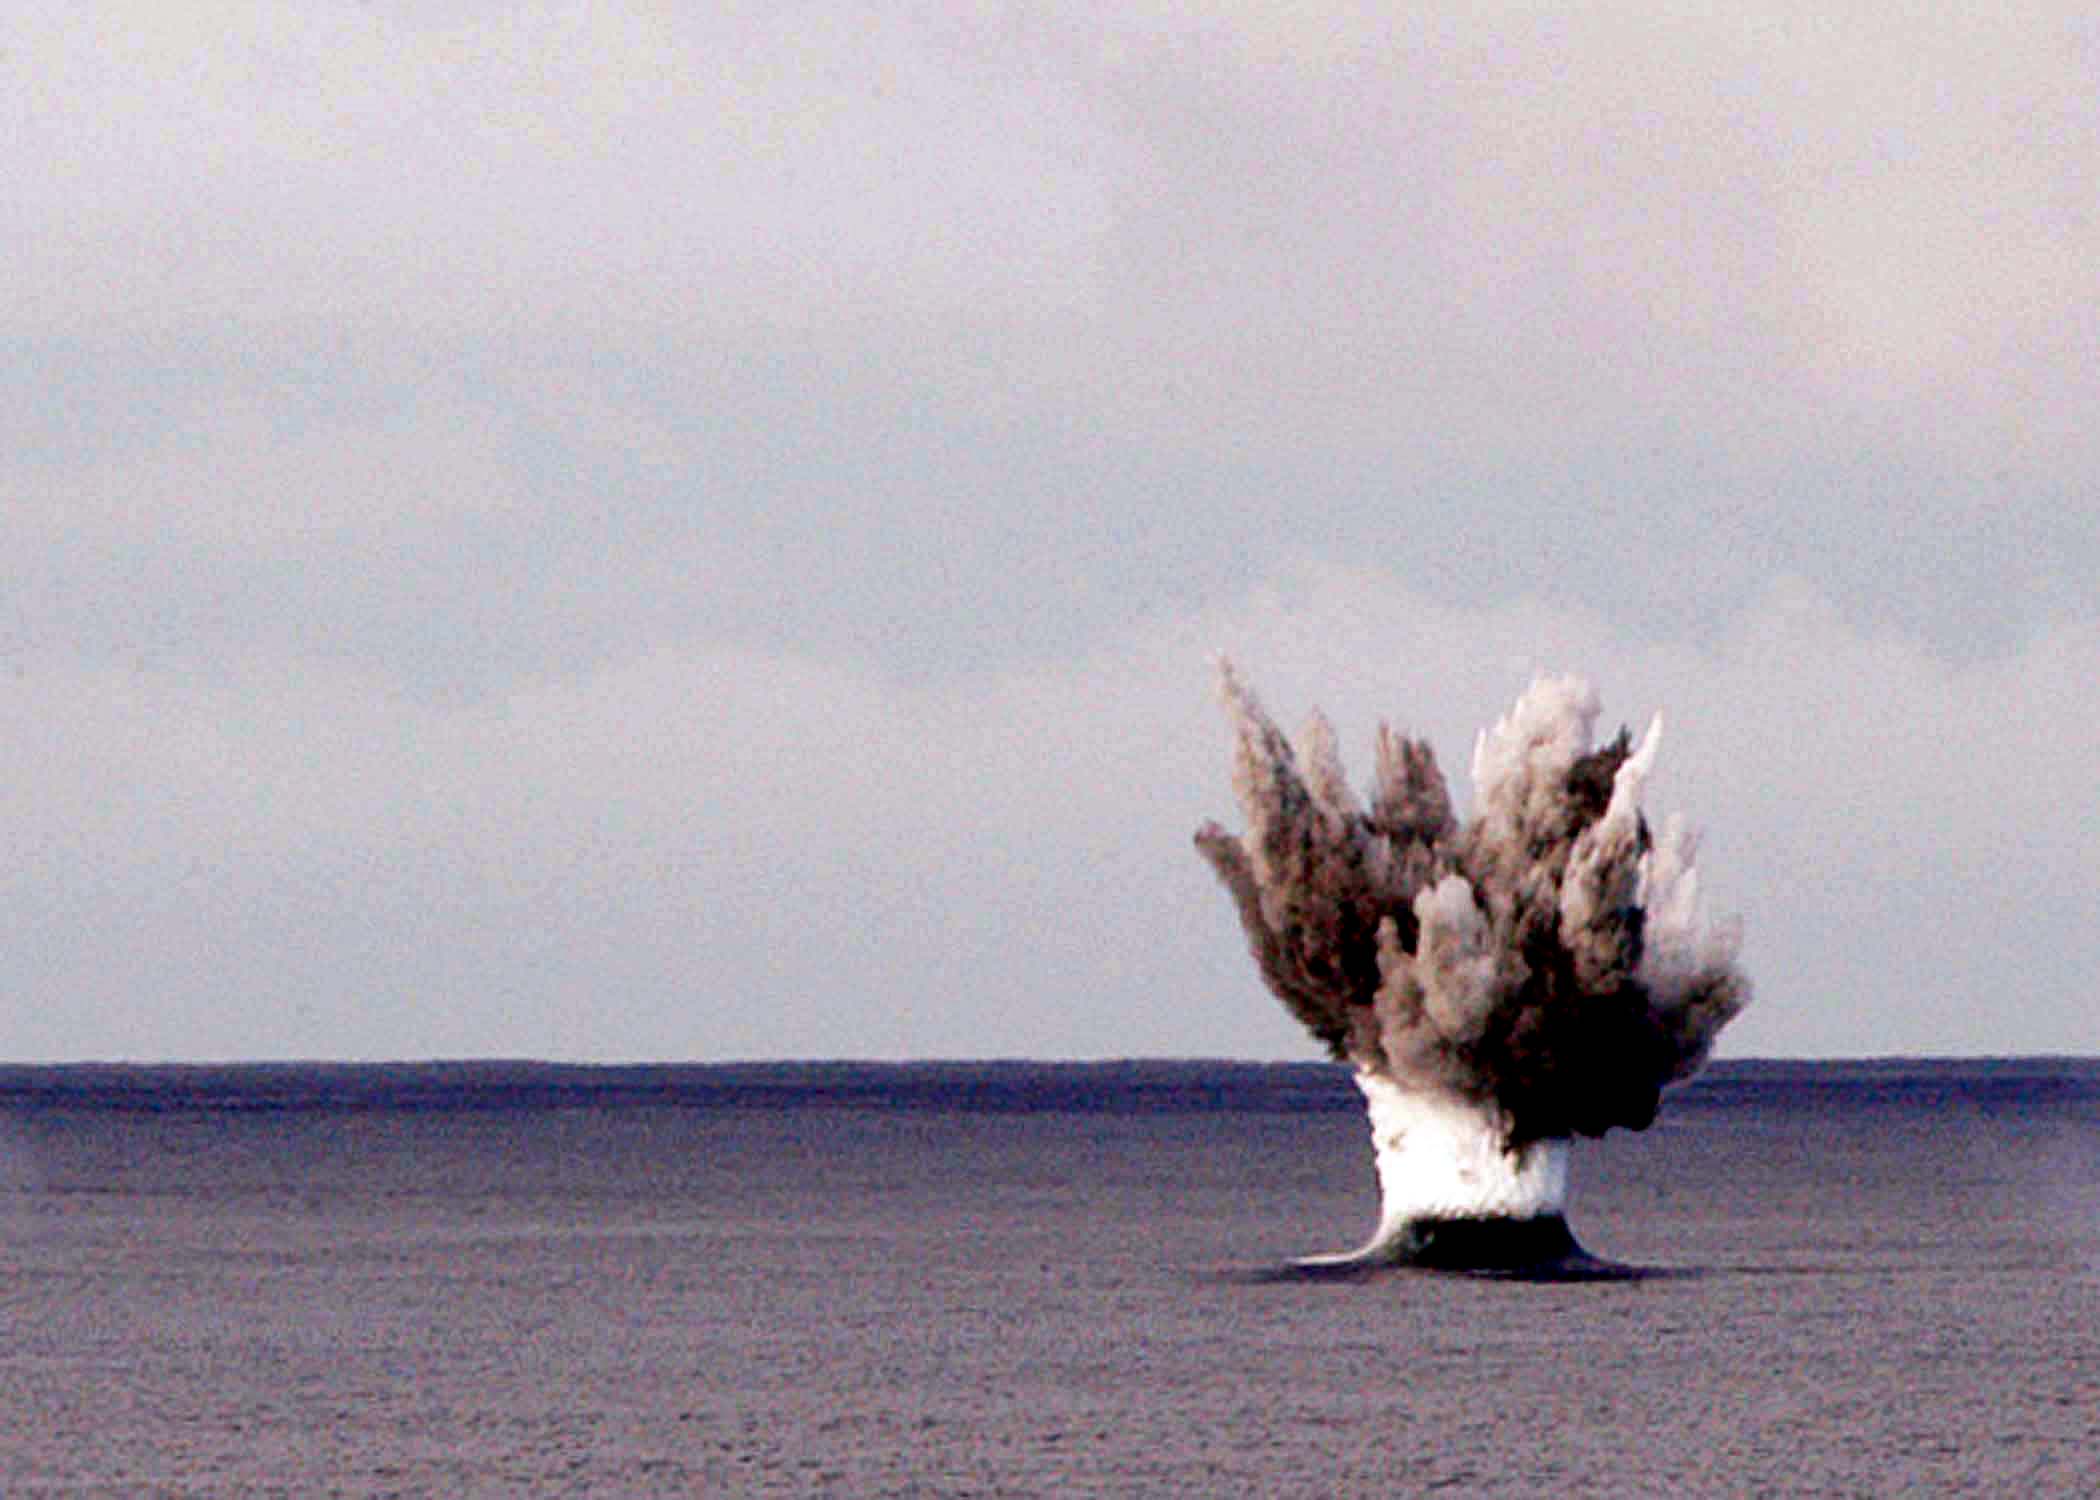 US_Navy_050225-N-6060O-038_A_live_MK-82_500_pound_general-purpose_bomb_creates_a_large_explosion_on_the_surface_of_the_Pacific_Ocean_during_Carrier_Air_Wing_Two%27s_(CVW-2)_Air_Power_Demonstration.jpg